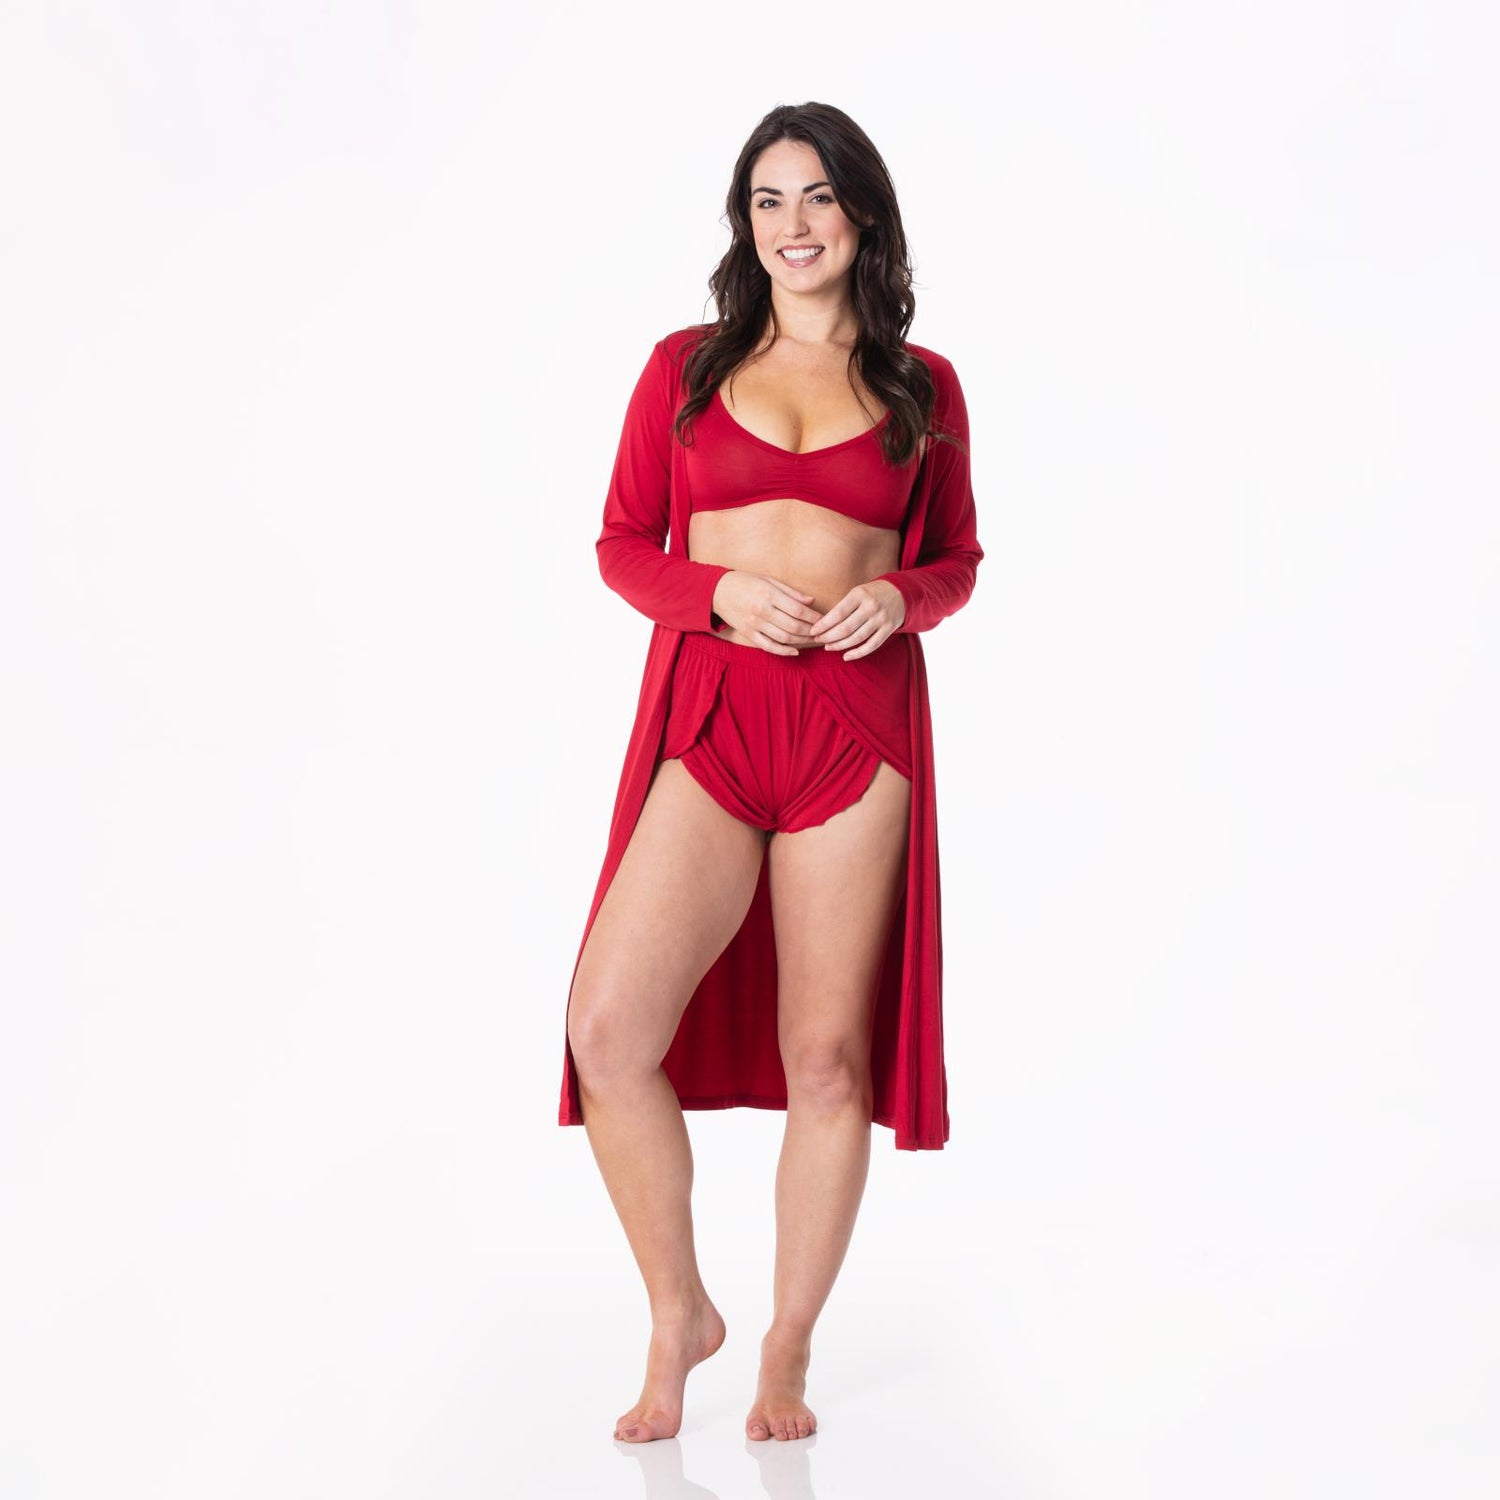 Women's Sleeping Bra, Tulip Shorts and Duster Robe Set in Candy Apple